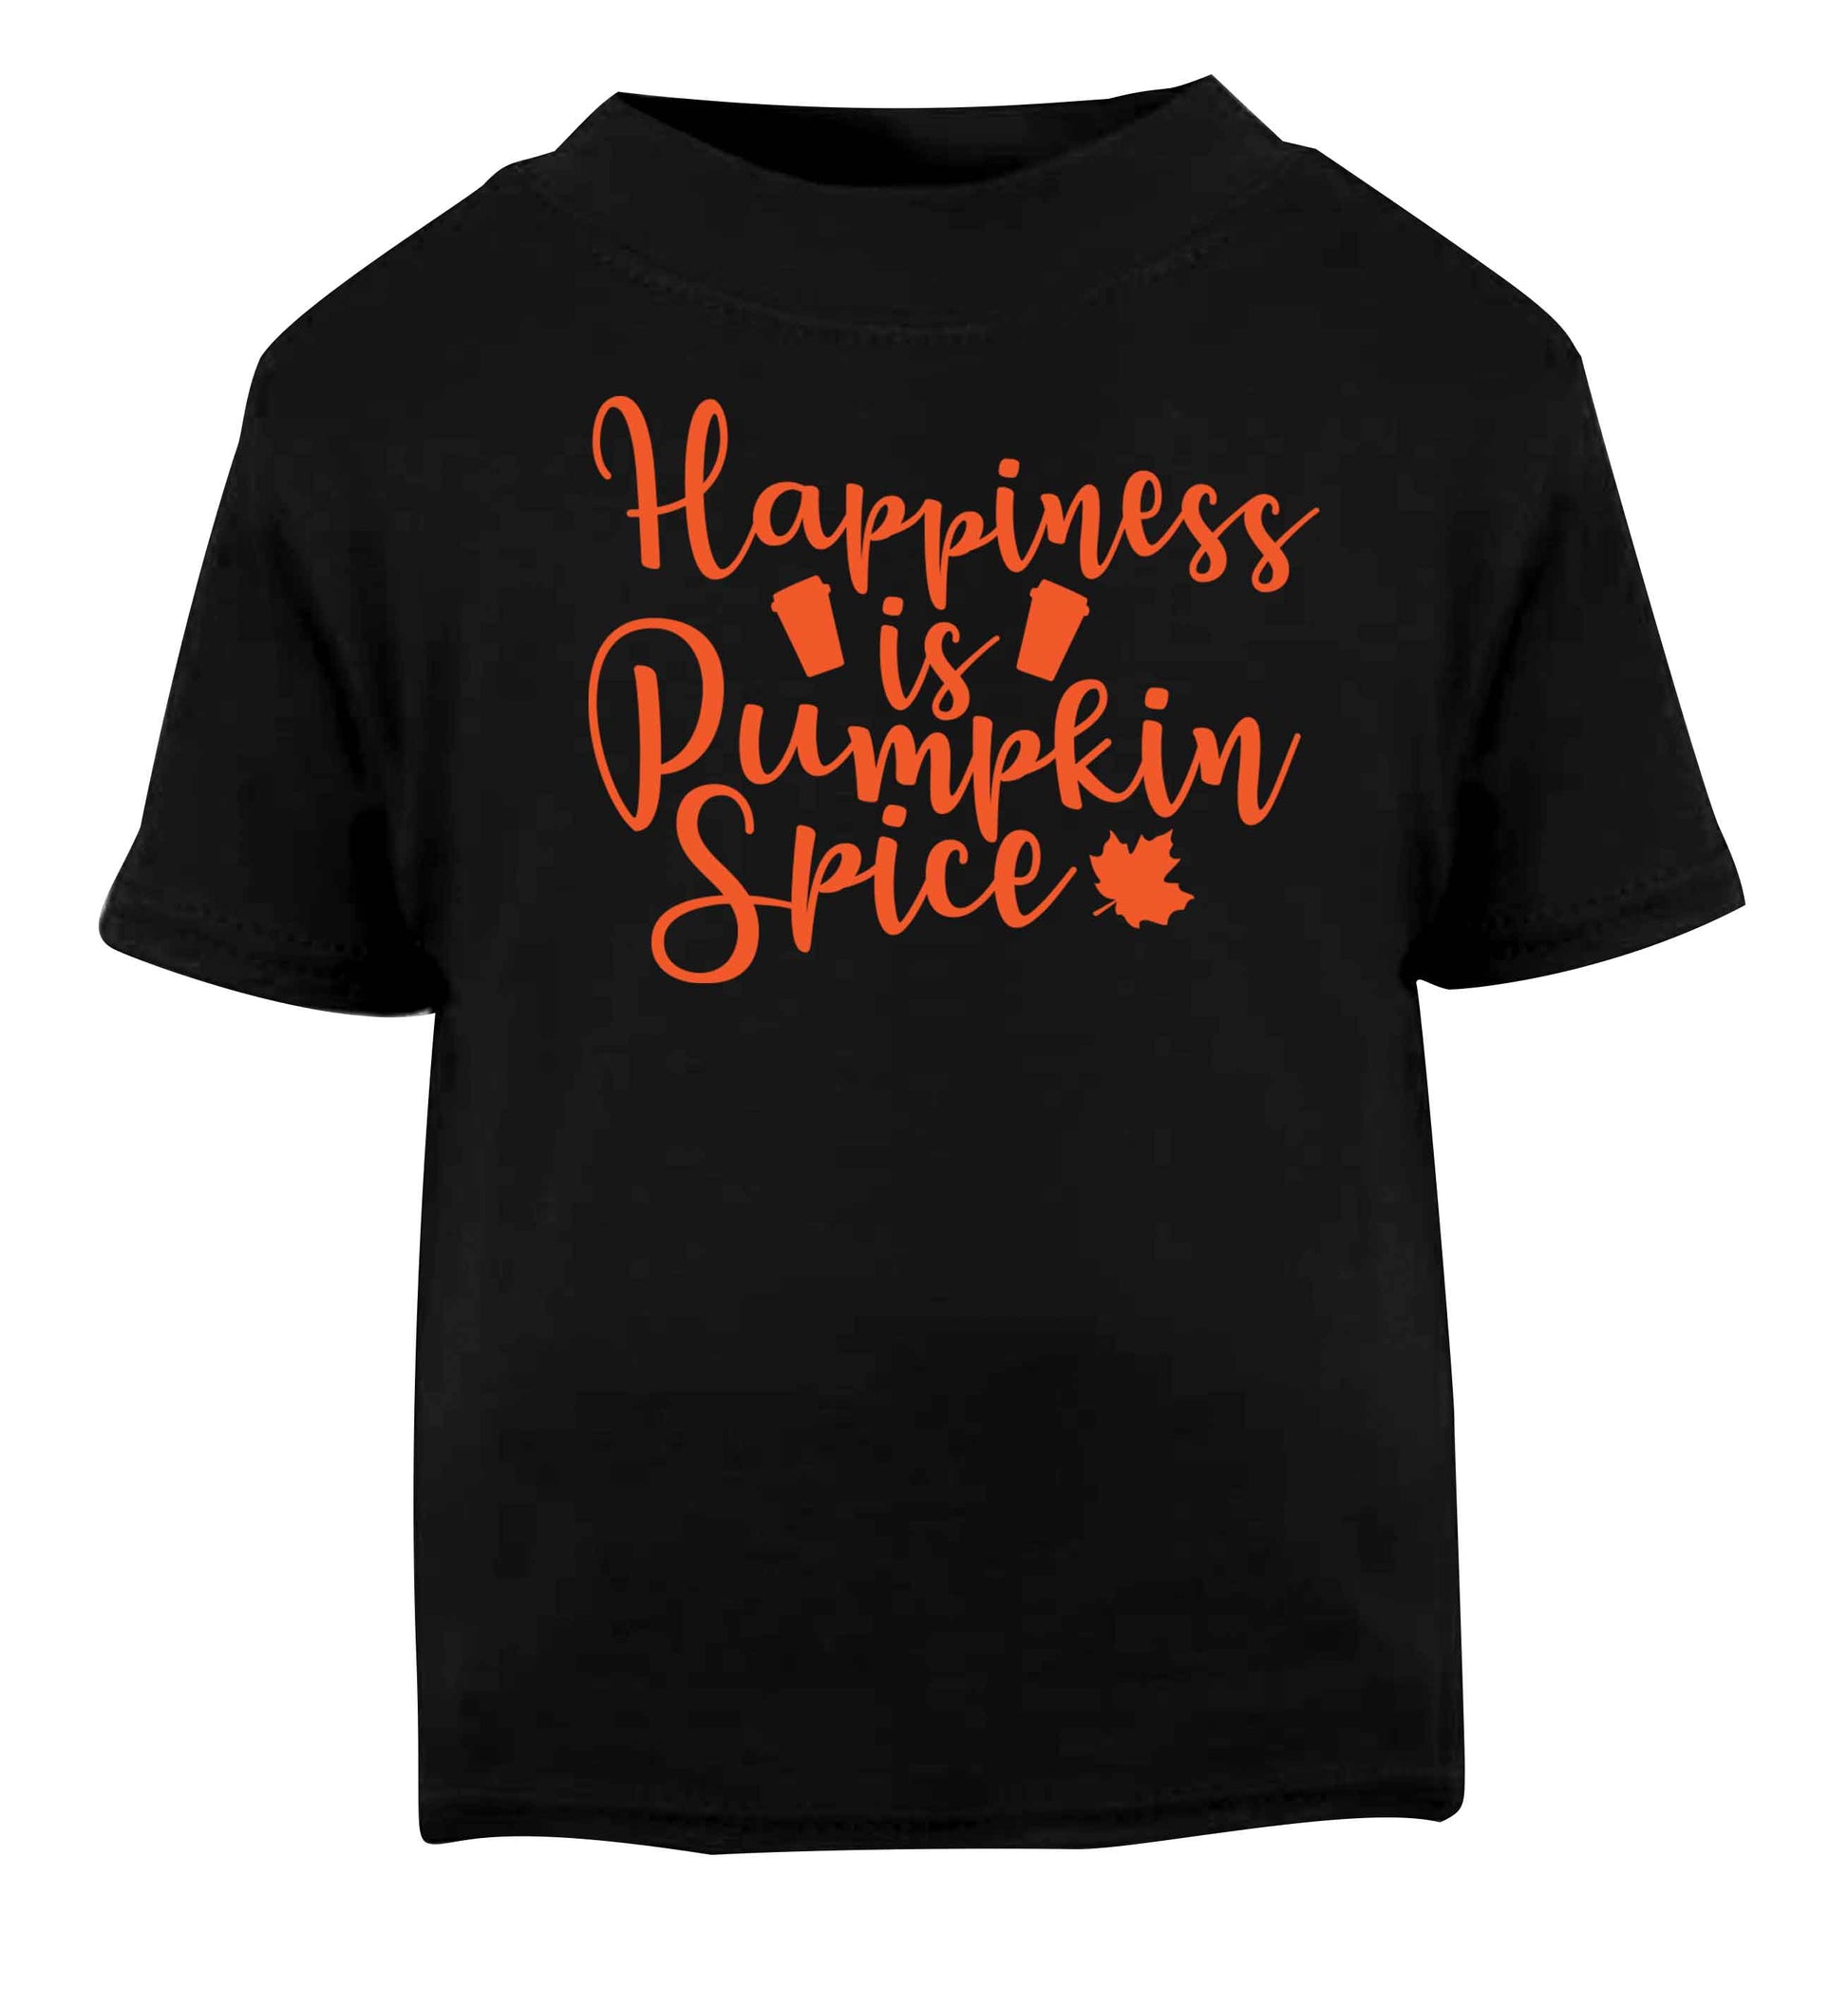 Happiness Pumpkin Spice Black baby toddler Tshirt 2 years